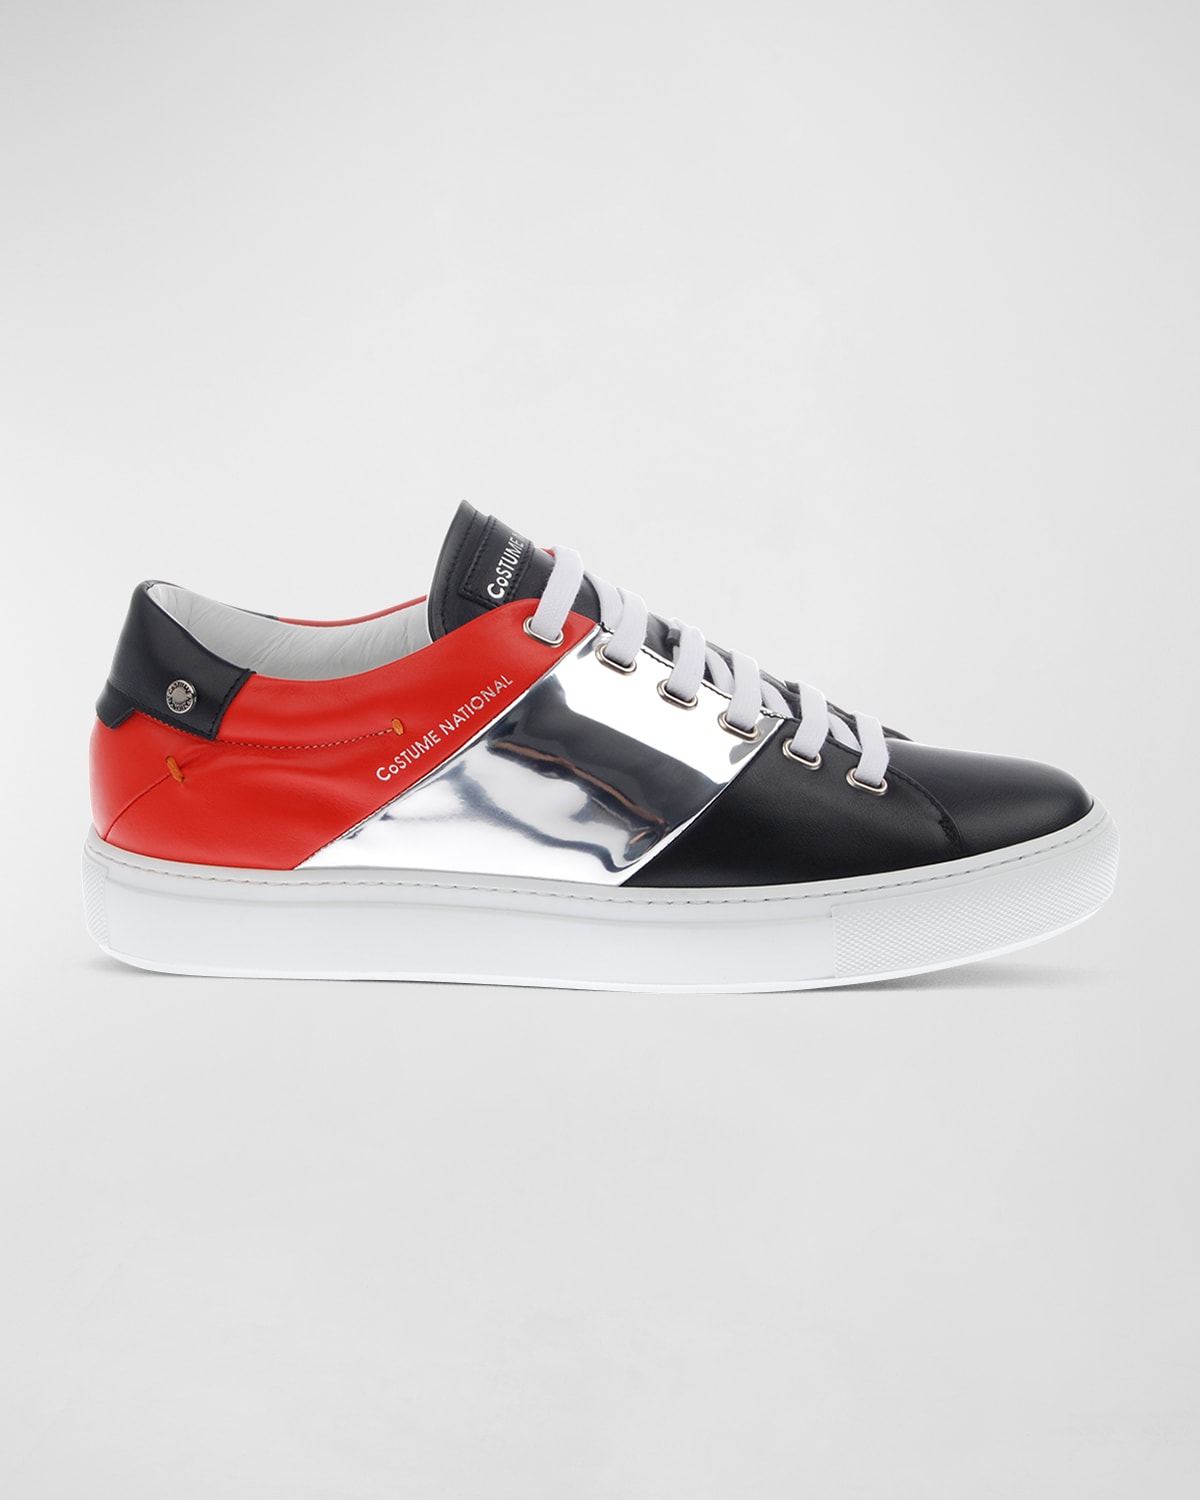 Costume National Men's Tricolor Leather Low-Top Sneakers